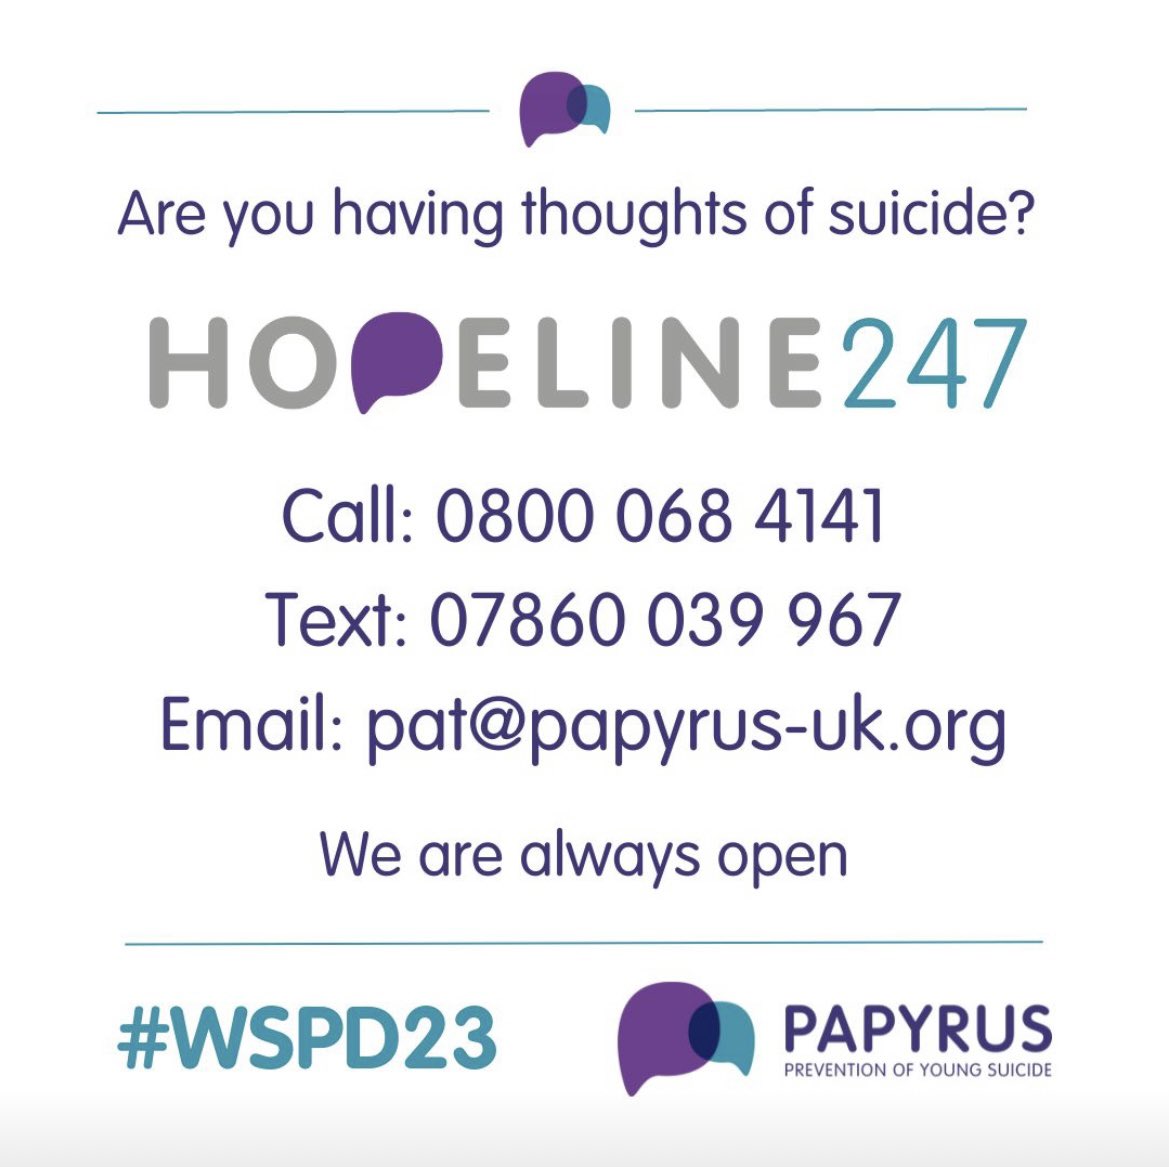 Today is #WorldSuicidePreventionDay.

Please take the time to share this post

Your outreach might be the lifeline someone desperately needs.Together, we can help save lives.Let's break the silence and stigma surrounding suicide. 💜

#WSPD #WSPD23 #SuicidePrevention #WeArePAPYRUS